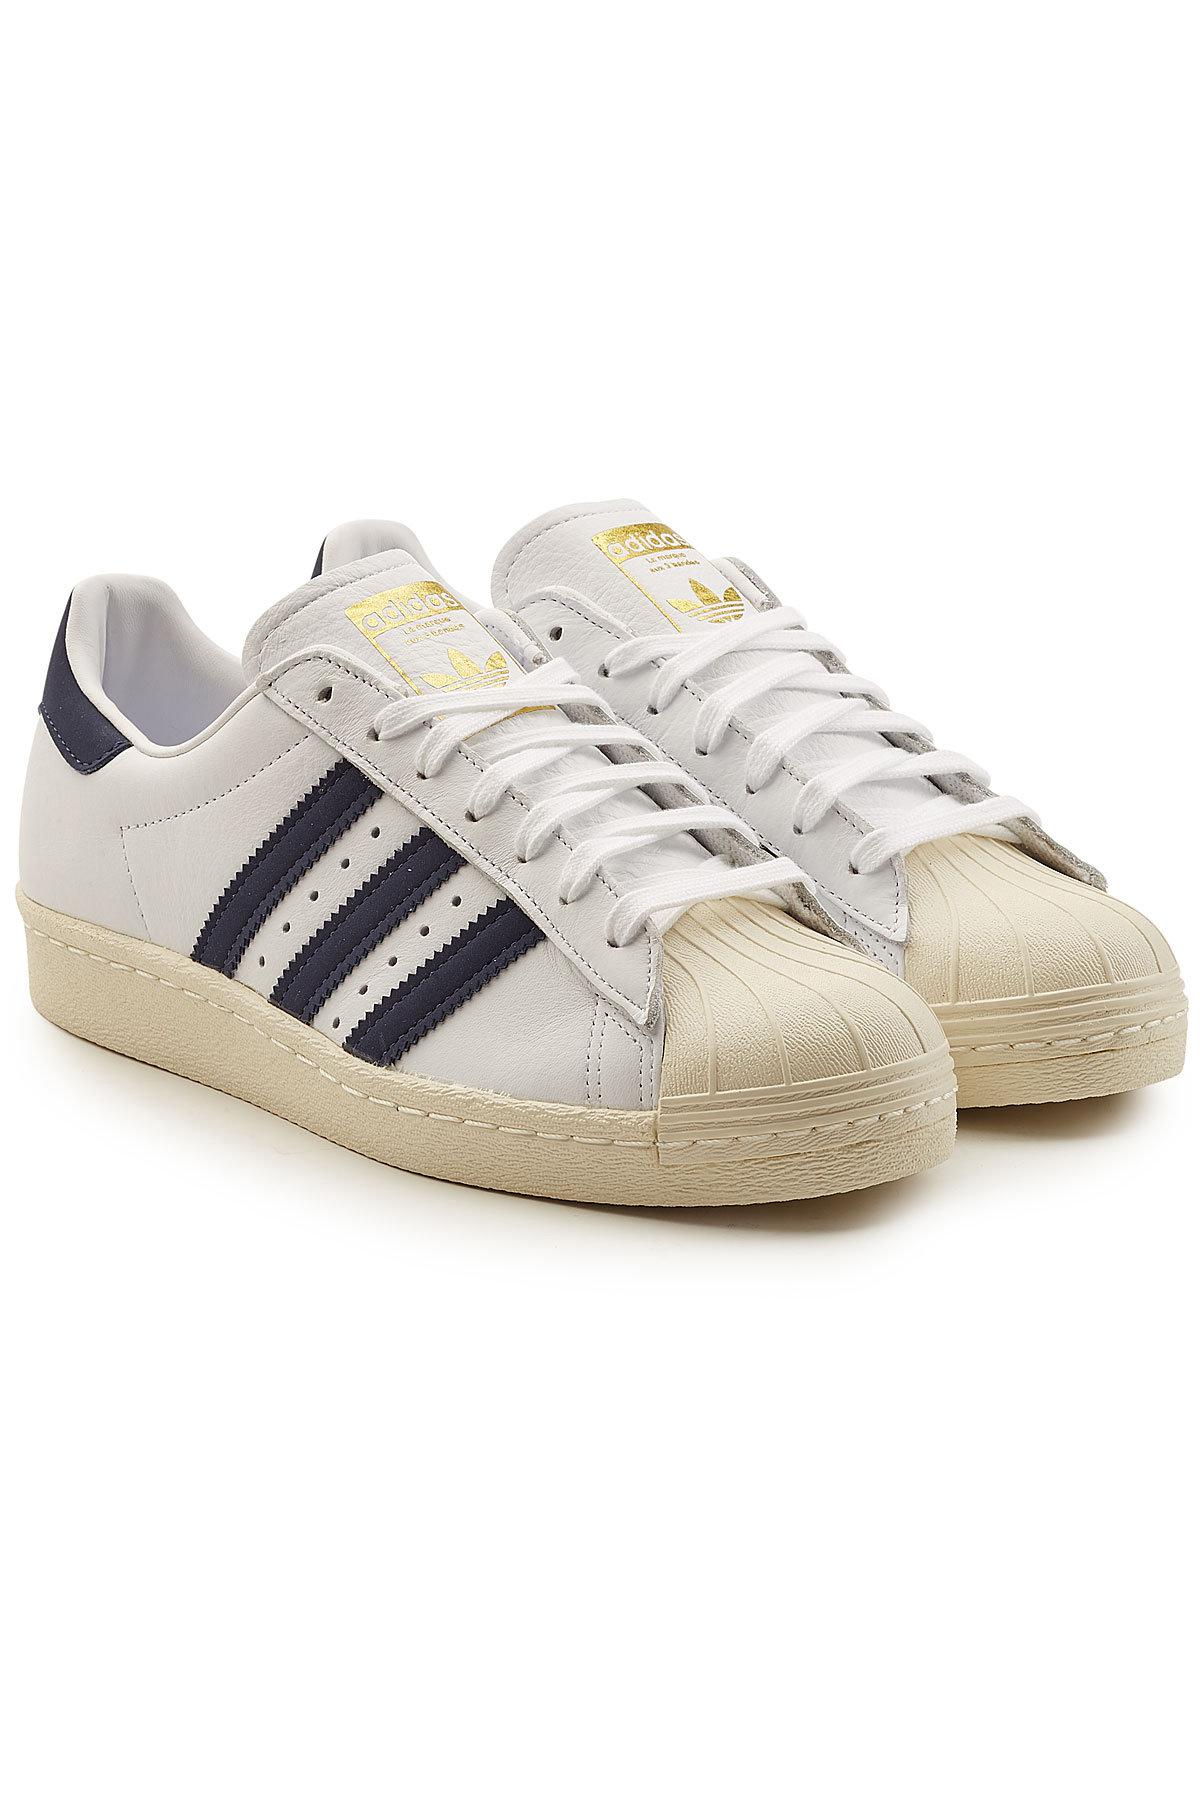 adidas Originals Superstar 80s Leather Sneakers for Men - Lyst